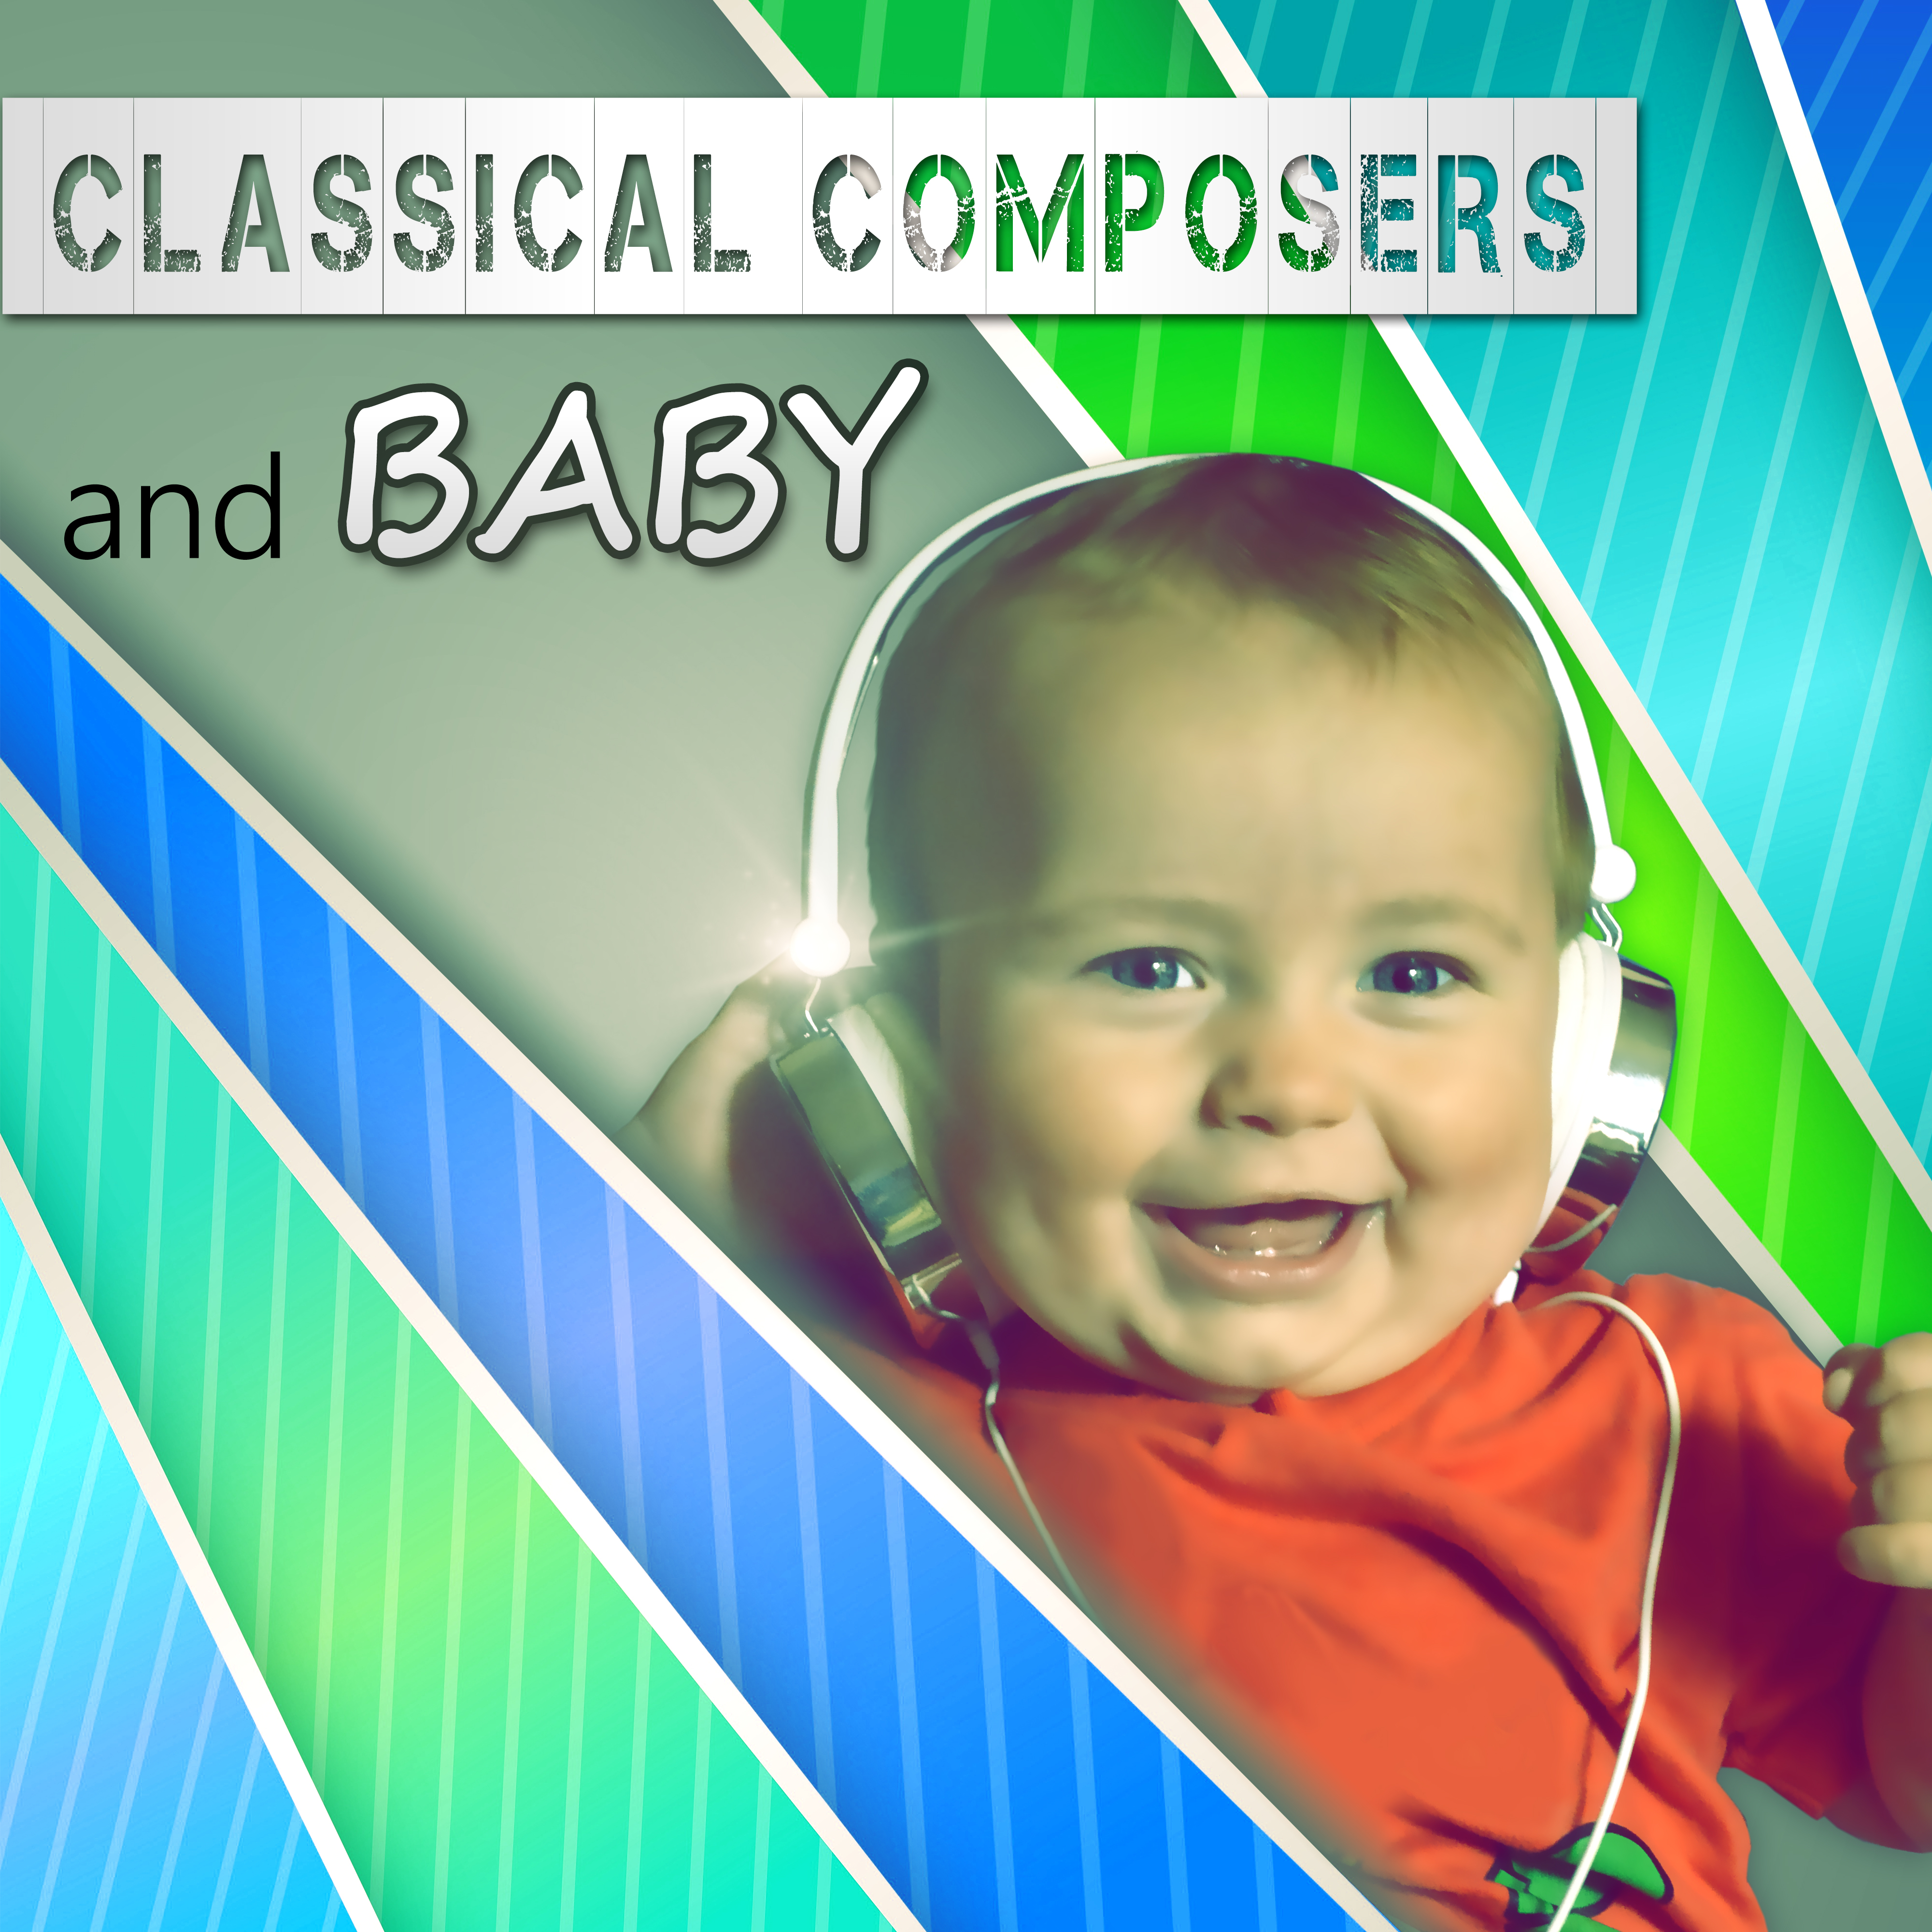 Classical Composers and Baby  Quiet Lullaby, Sweet Melody to Sleep, Classical Music for Babies, Classical Bedtime, Mozart, Bach, Beethoven